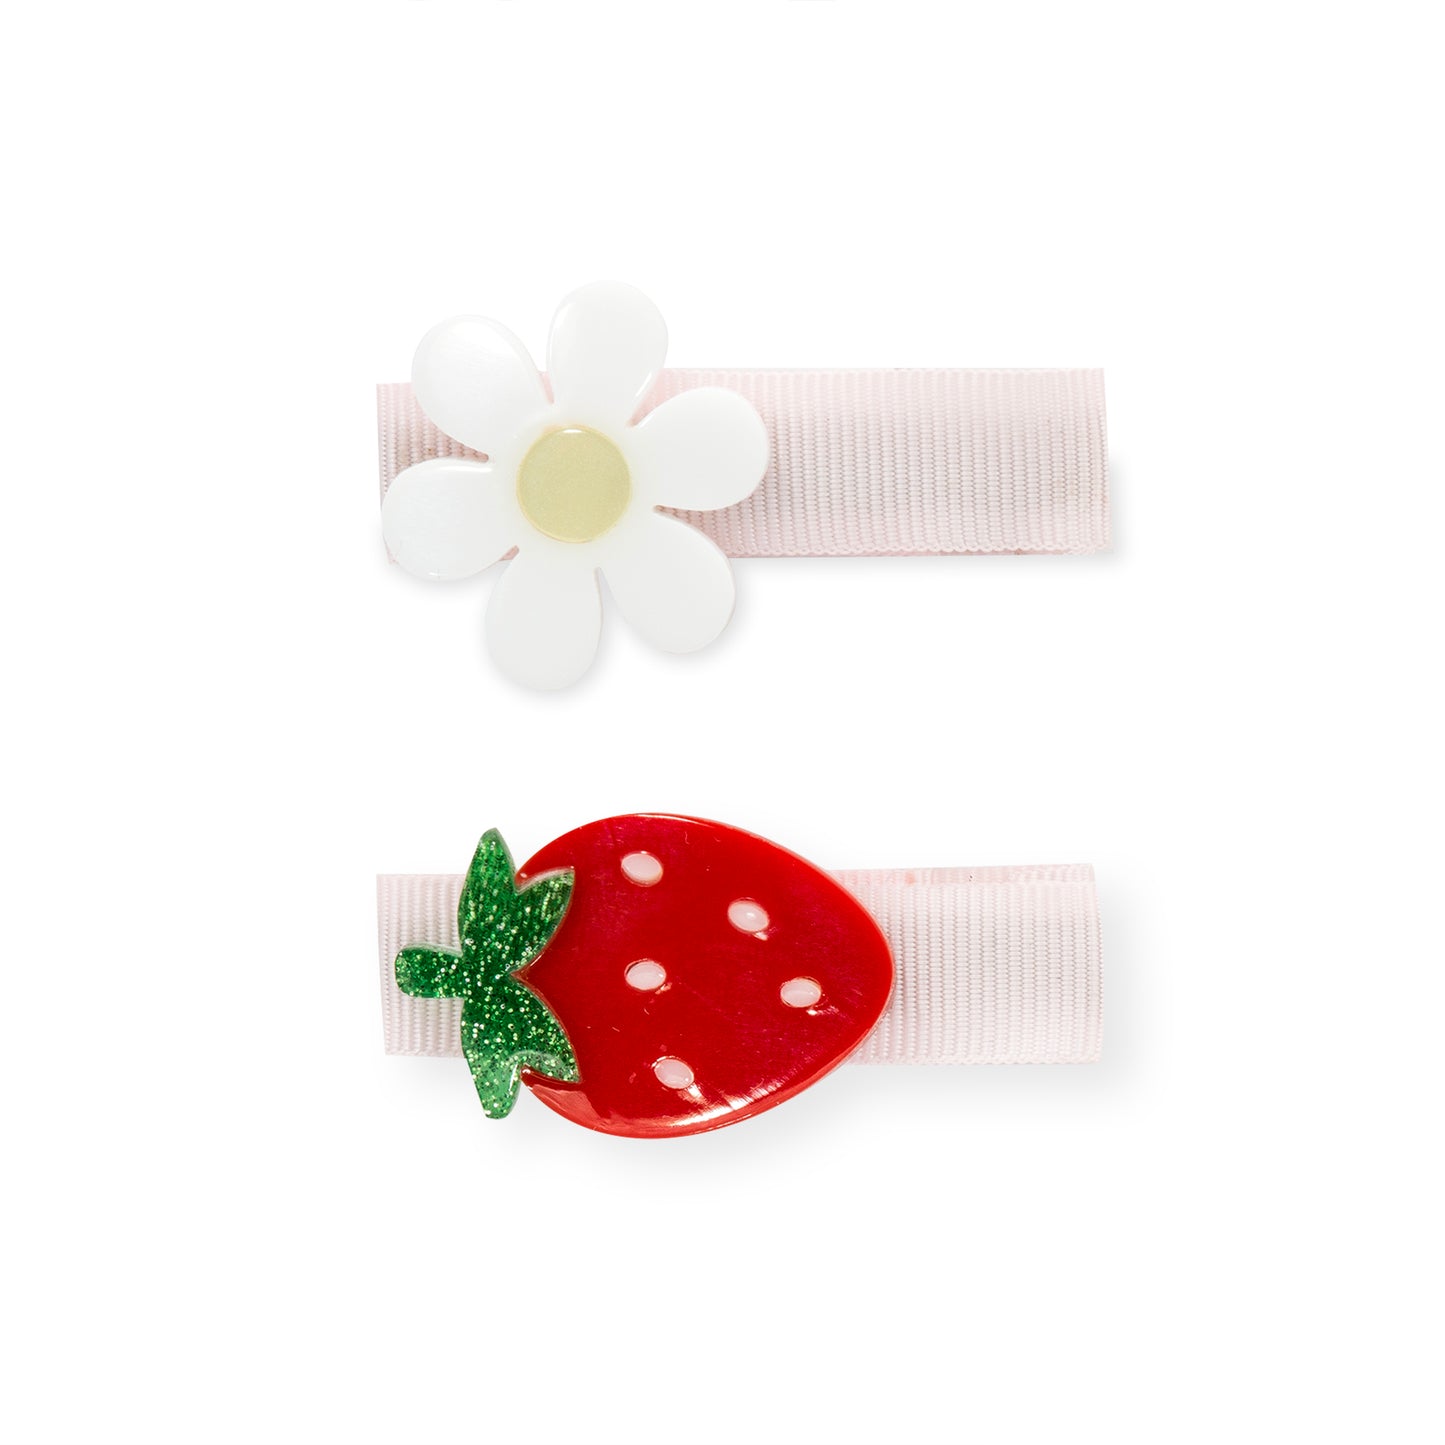 Pair of hair clips. One of them is adorned with a strawberry and the other one with a daisy. 